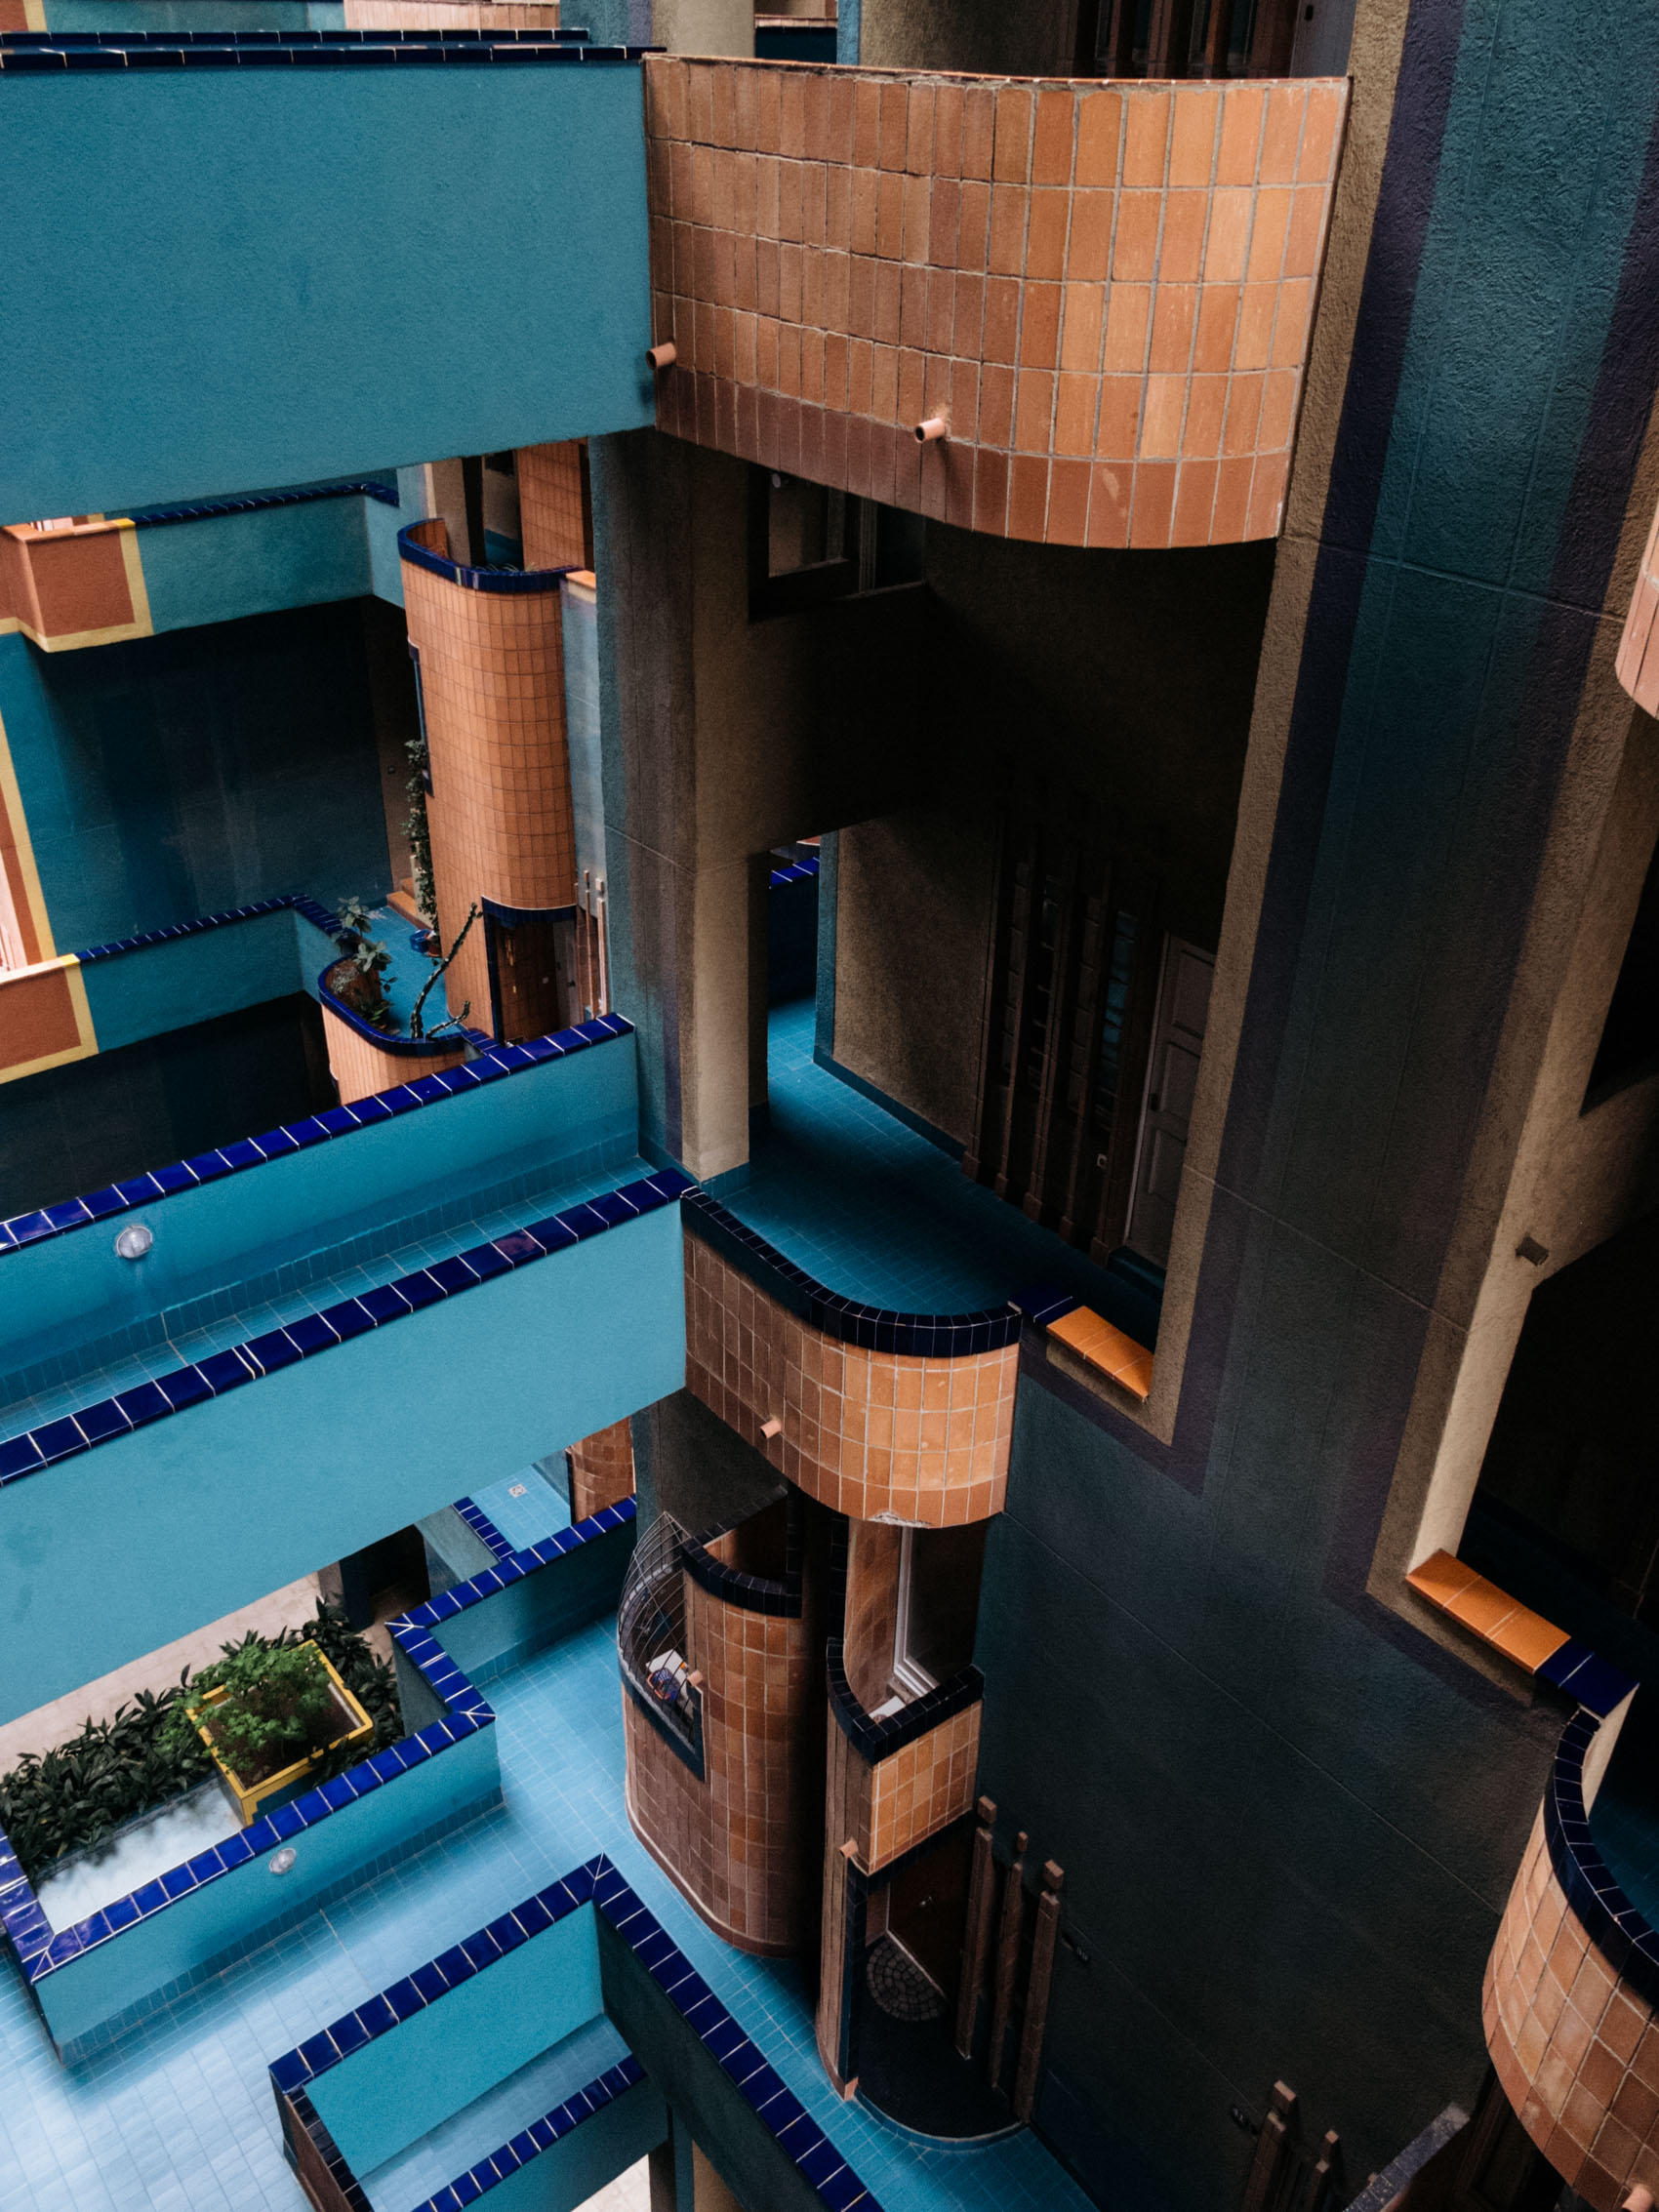 Ricardo Bofill's Walden 7 in the outskirts of Barcelona, Spain